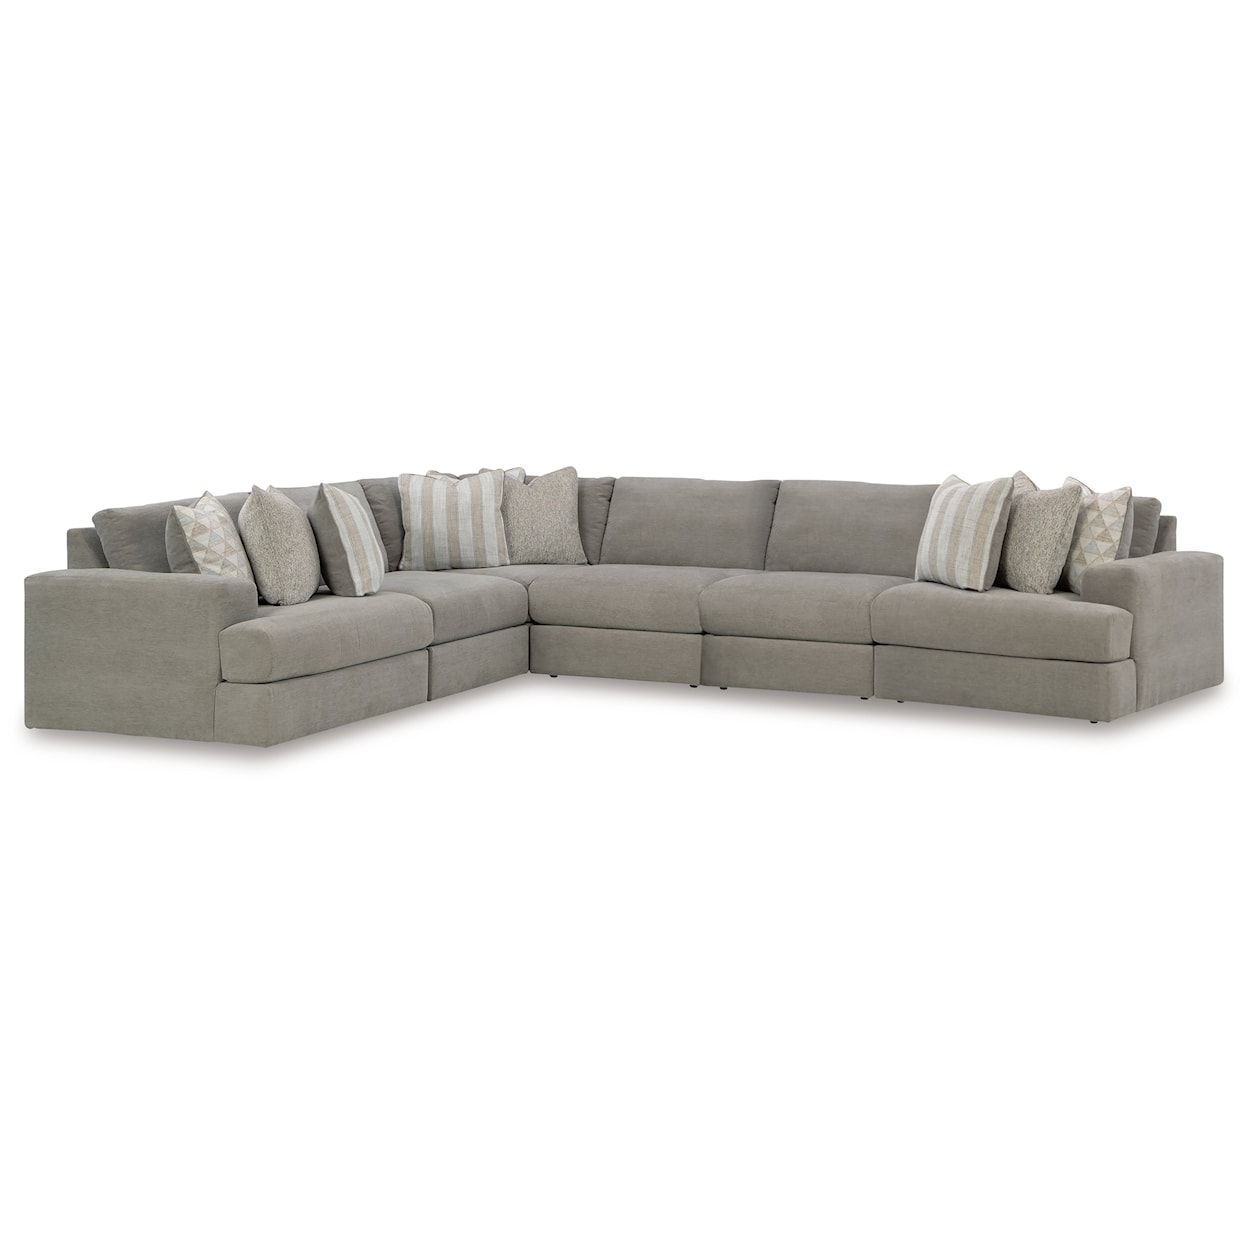 Signature Design by Ashley Furniture Avaliyah 6-Piece Sectional